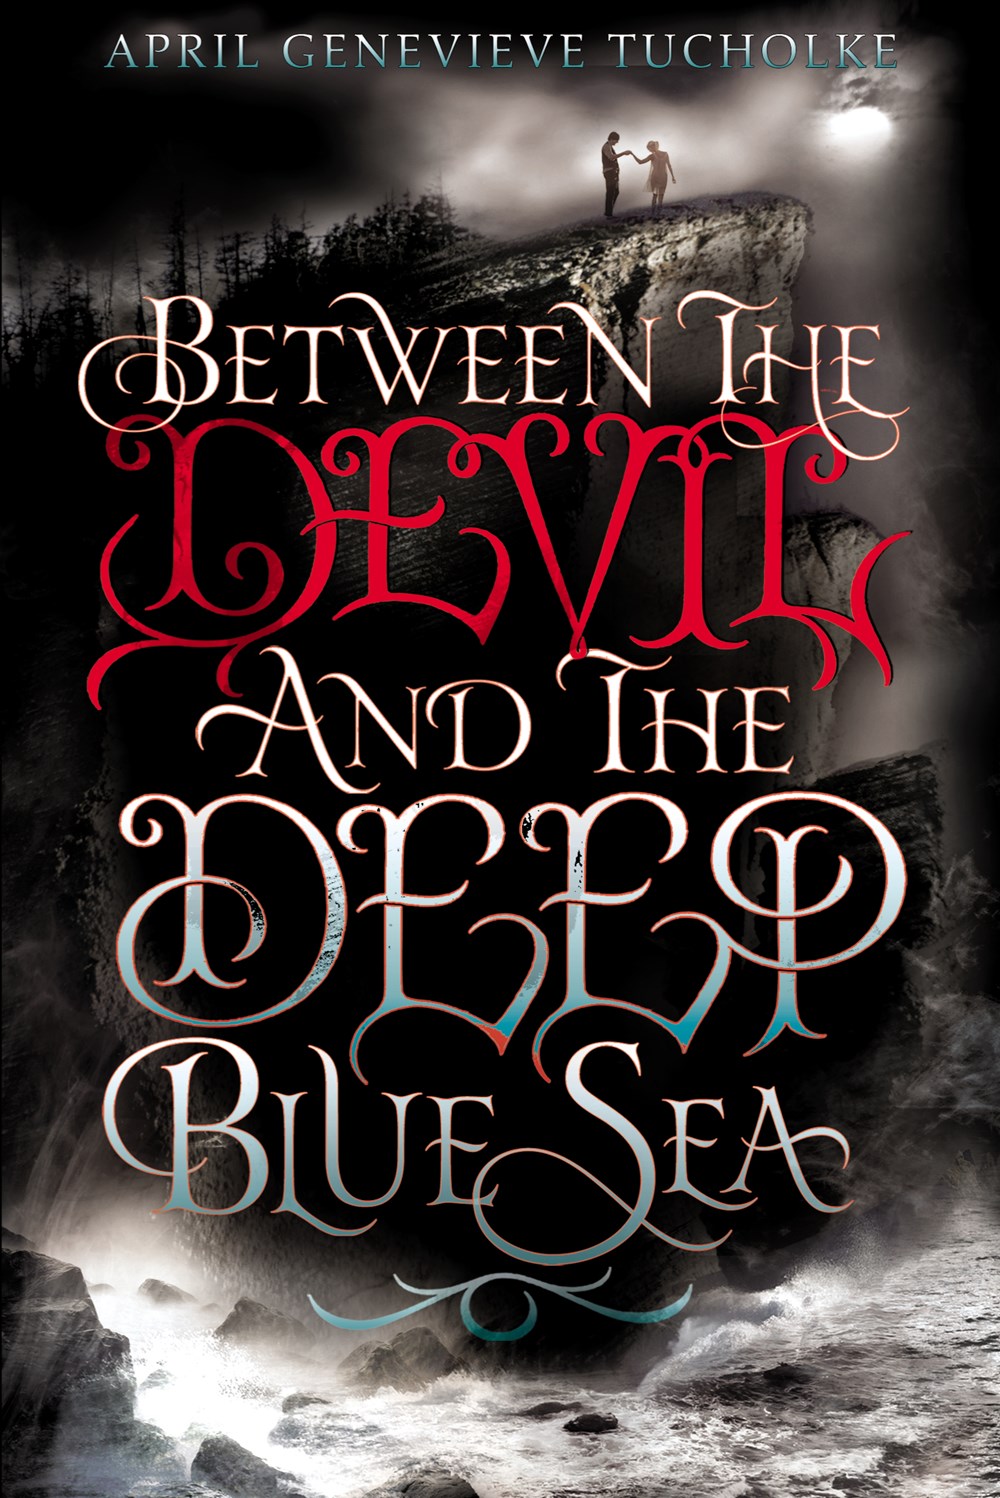 Between the Devil and the Deep Blue Sea by April Genevieve Tucholke Book Cover.jpg